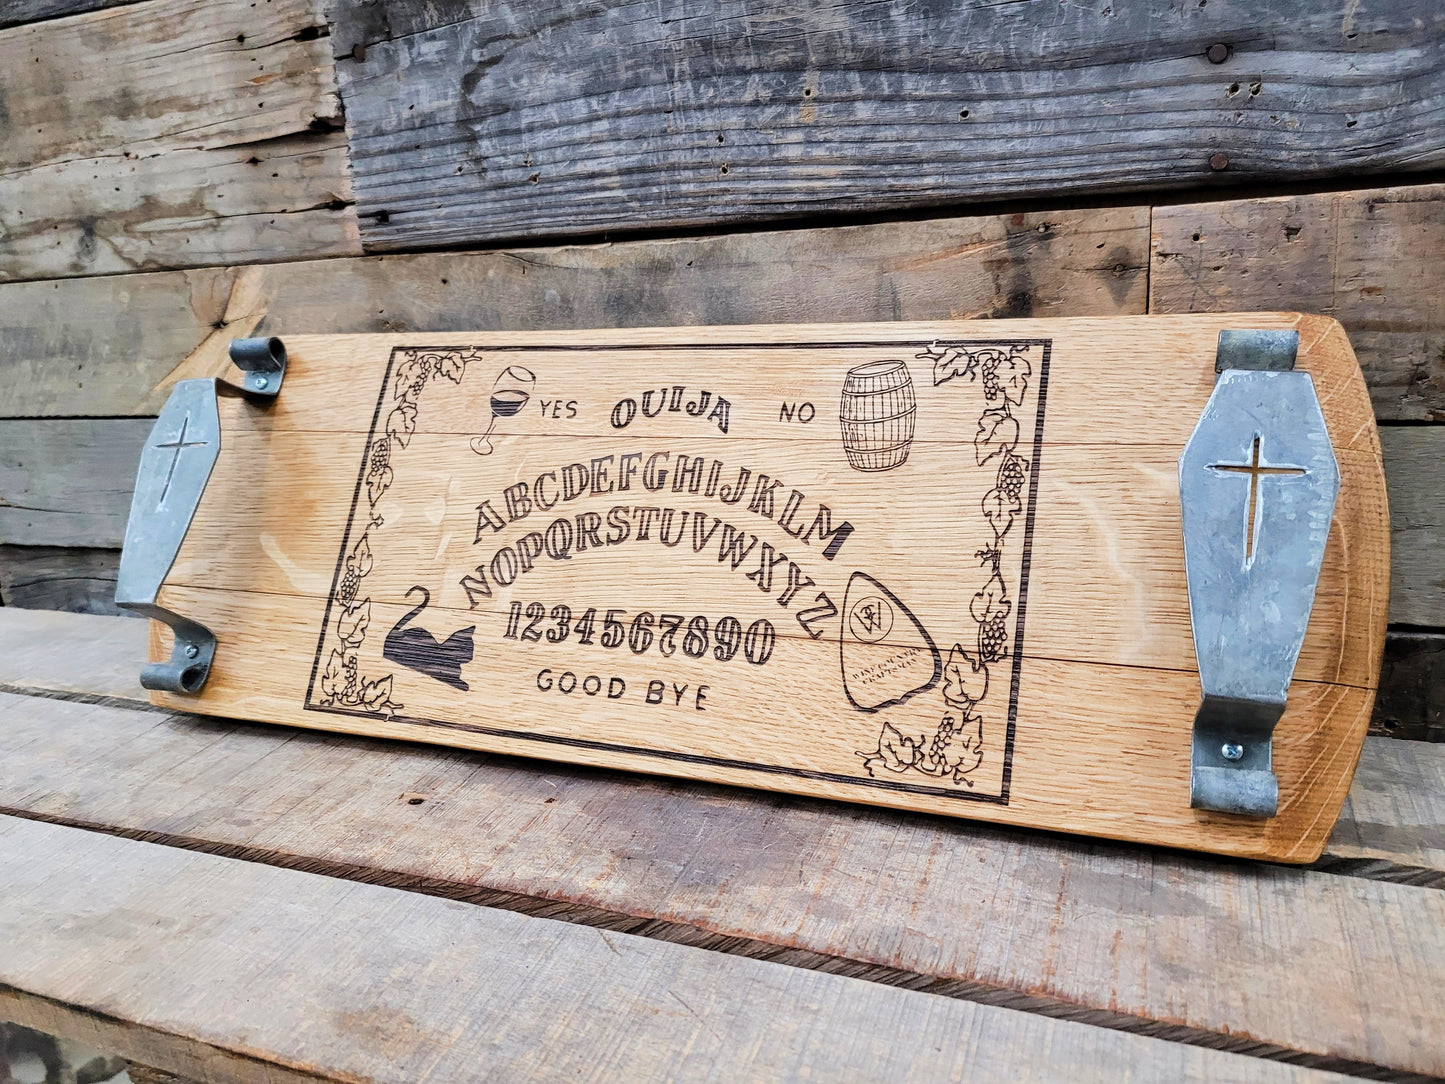 Halloween Cutting / Serving Board w/ Coffin Handles - Ouija - Made from retired California wine barrels. 100% Recycled!